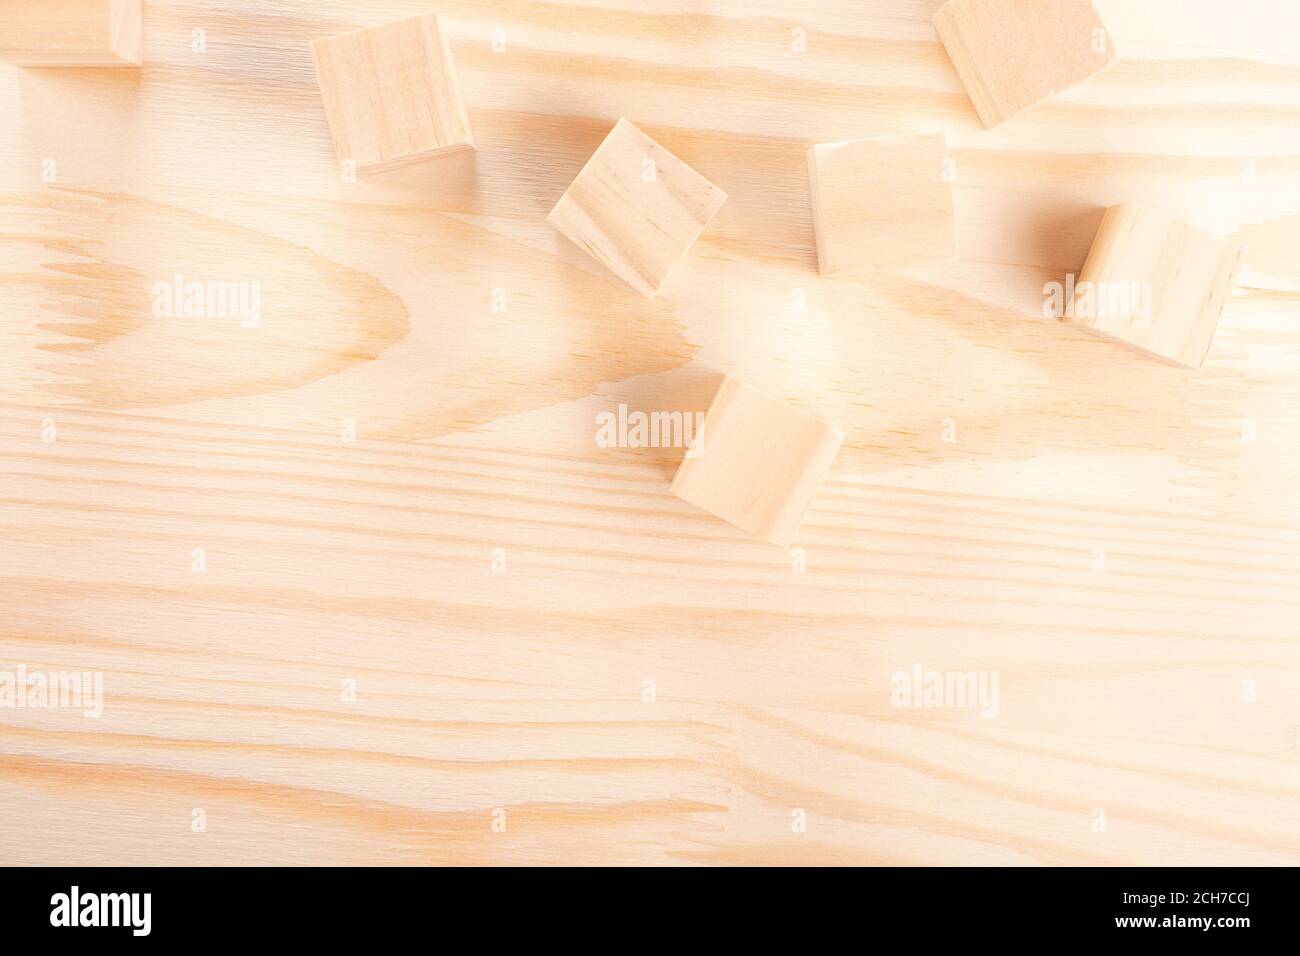 wooden cubes on a light wooden background. warm wooden background. the concept of creativity, products from natural wood, wood crafts. Stock Photo